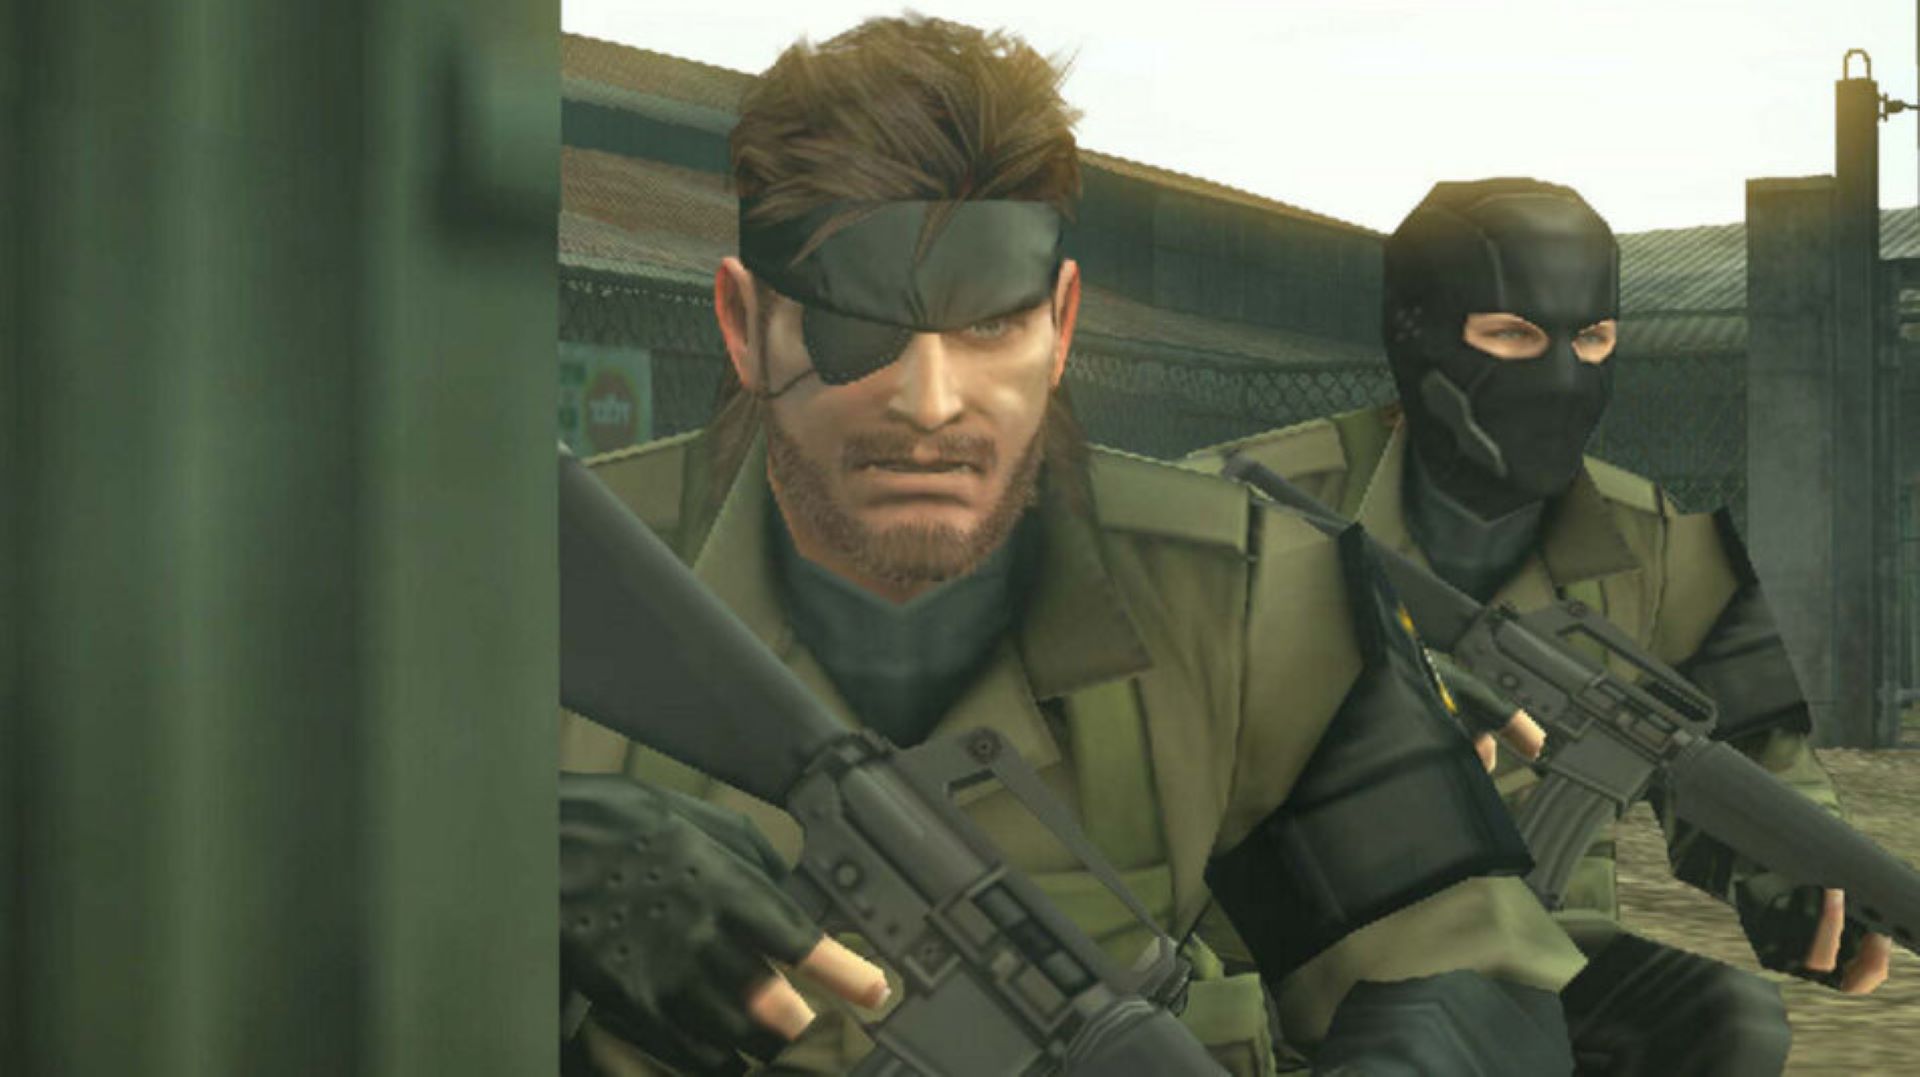 Hideo Kojima has one big regret with Metal Gear Solid: Peace Walker, and it's all about a song he couldn't secure the rights to